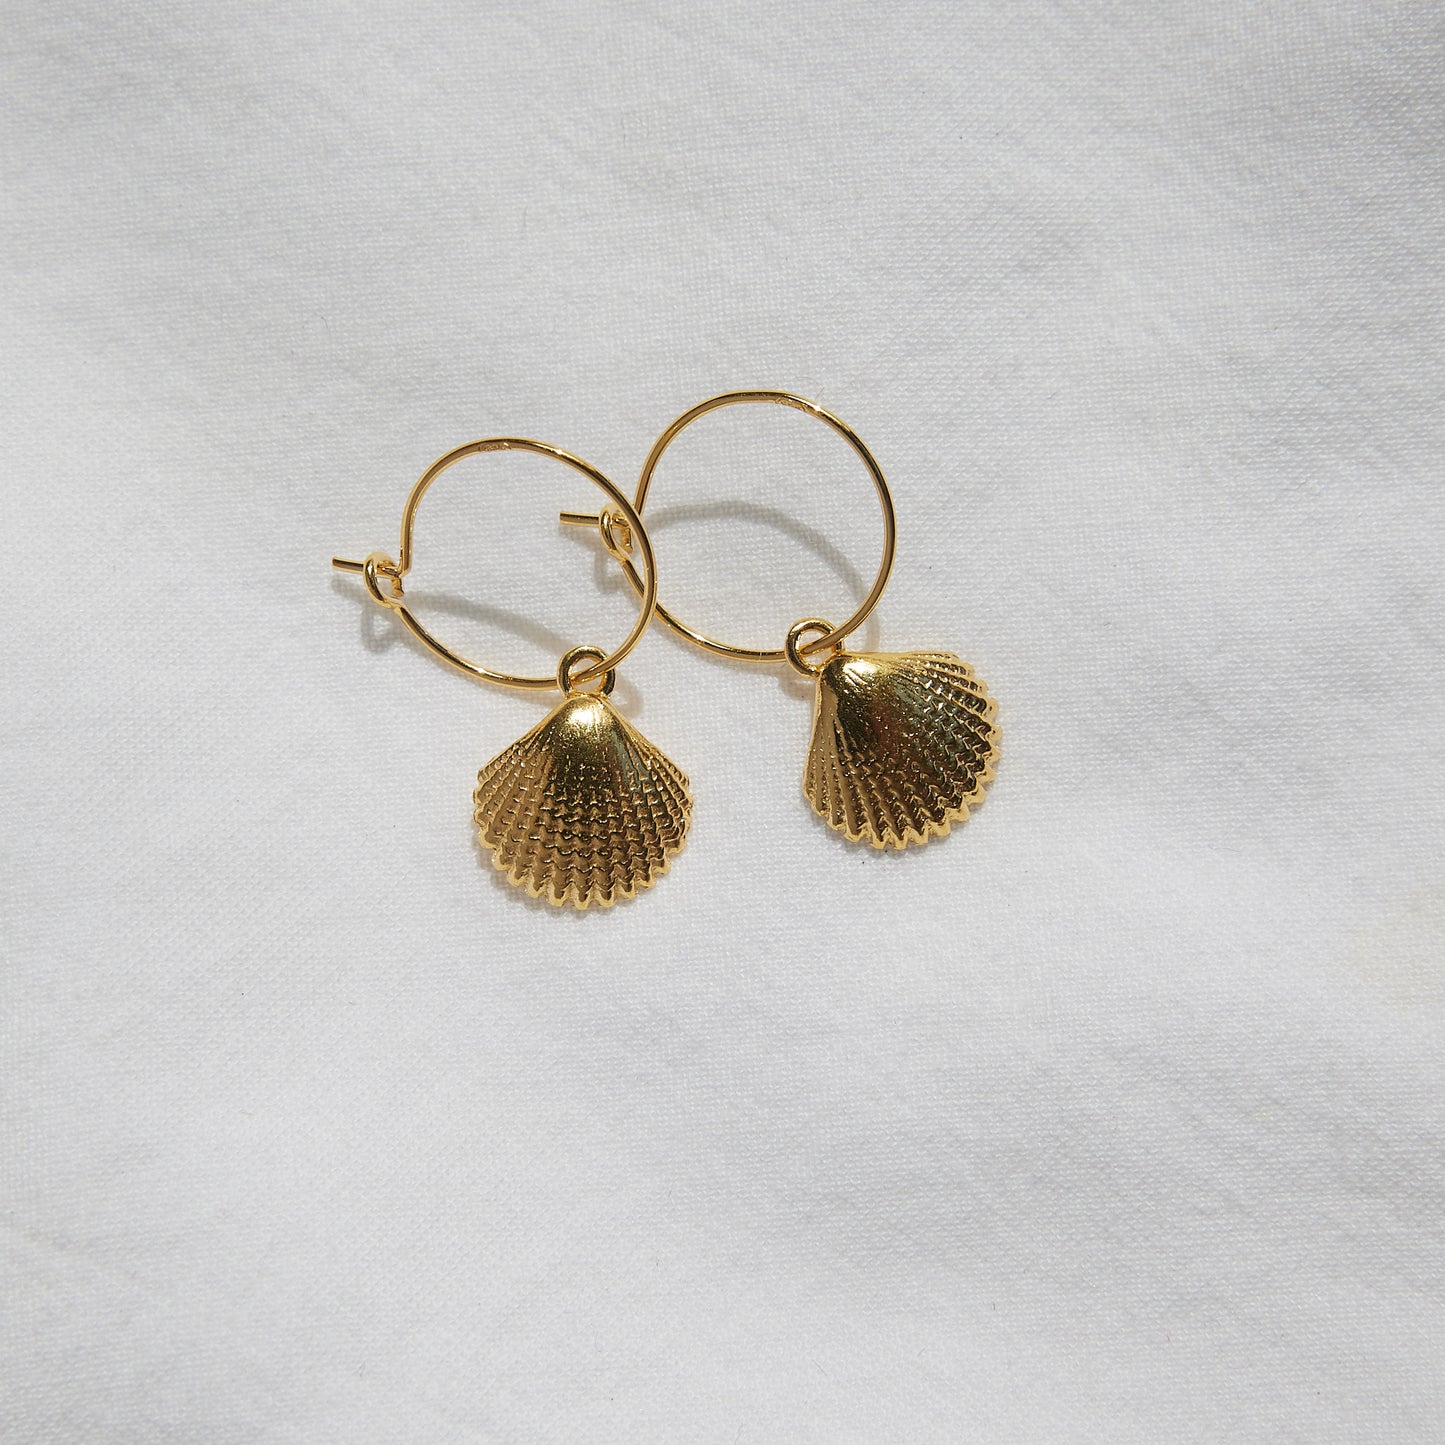 Seashell hoops 24k gold plated sterling silver